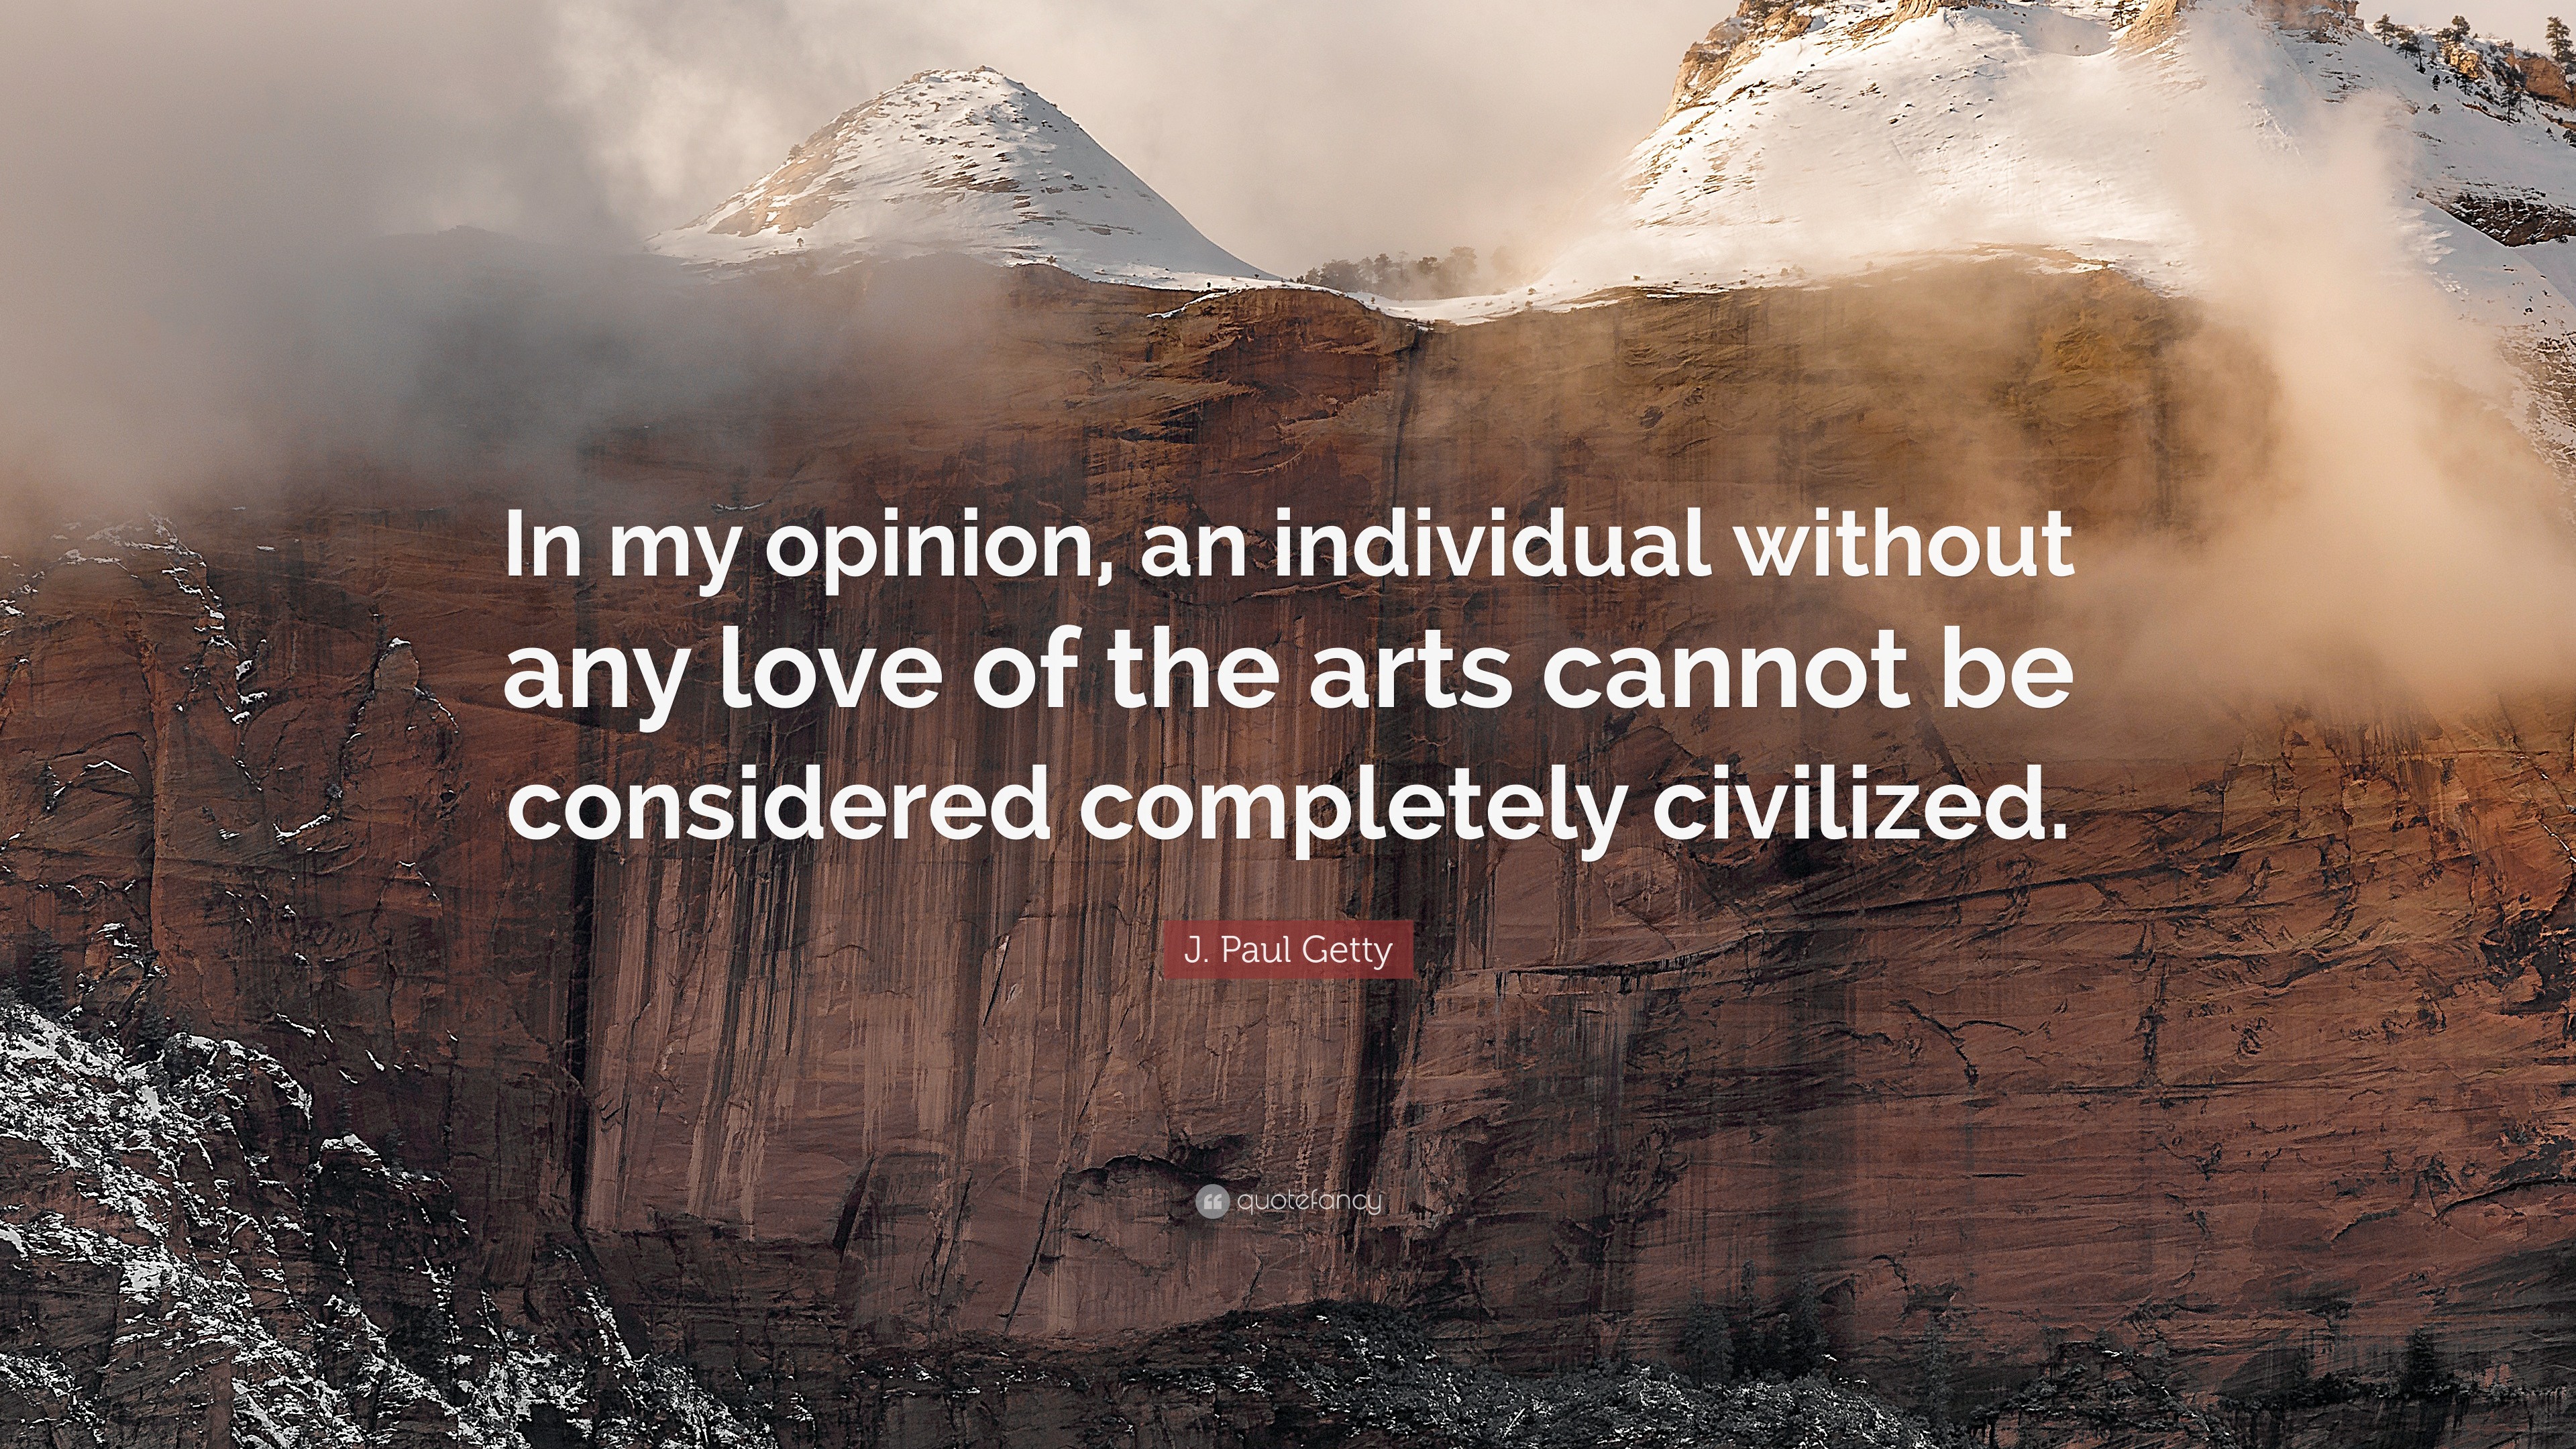 J. Paul Getty Quote: “In my opinion, an individual without any love of